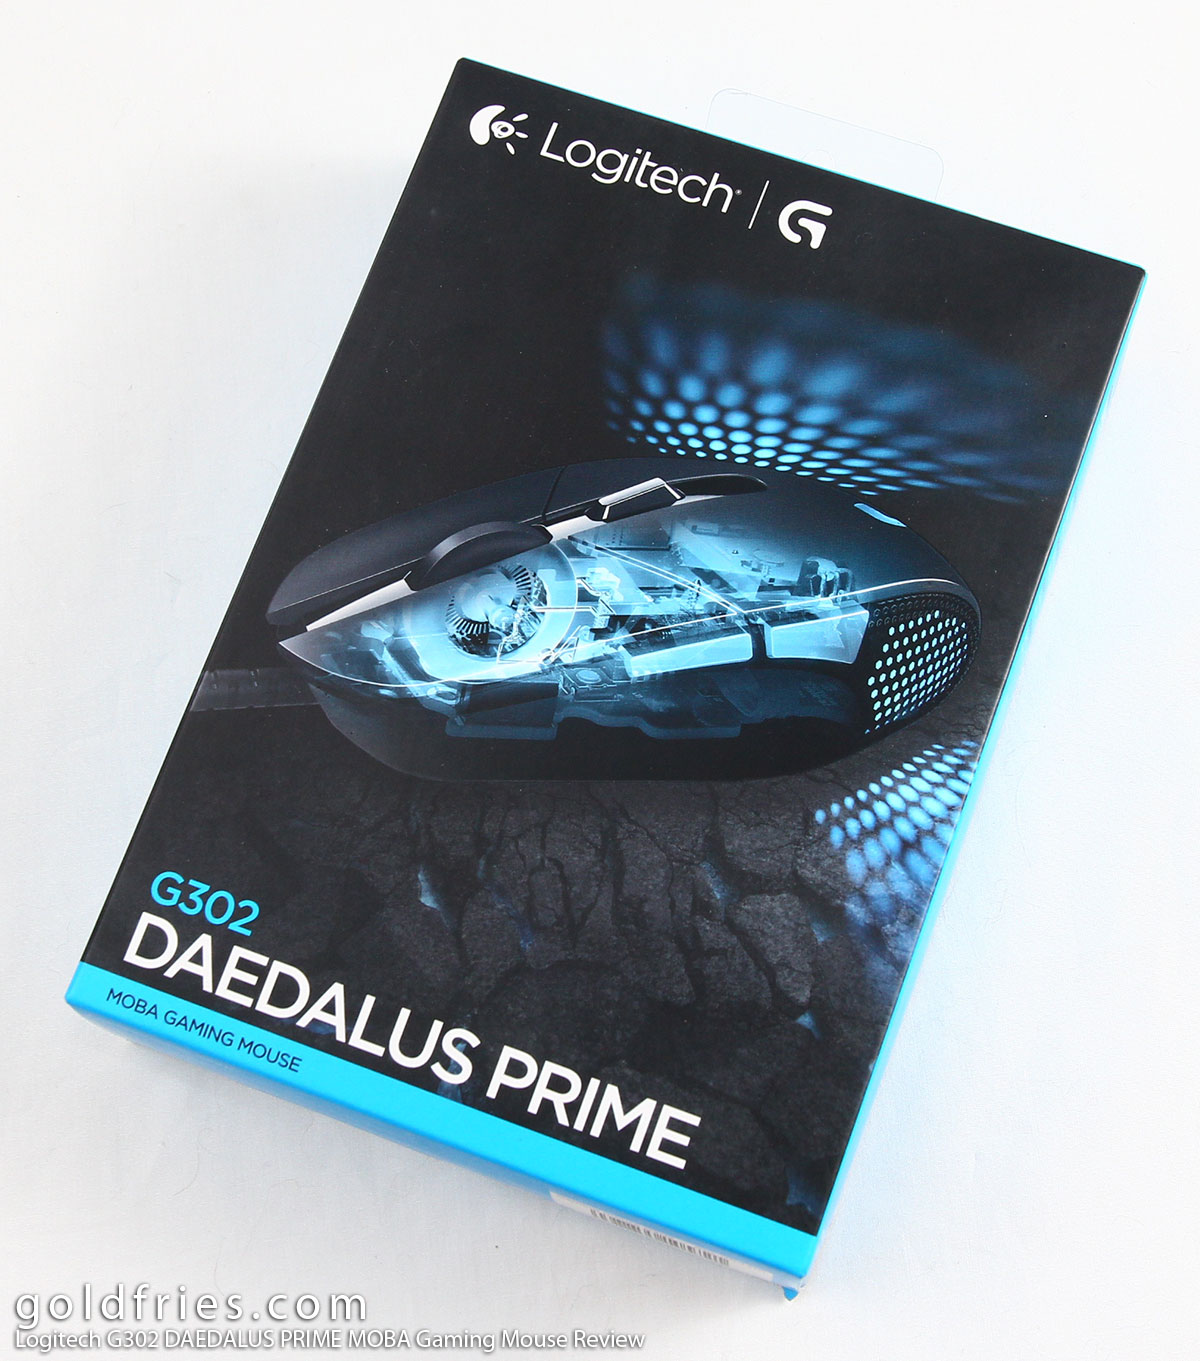 Logitech G302 DAEDALUS PRIME MOBA Gaming Mouse Review